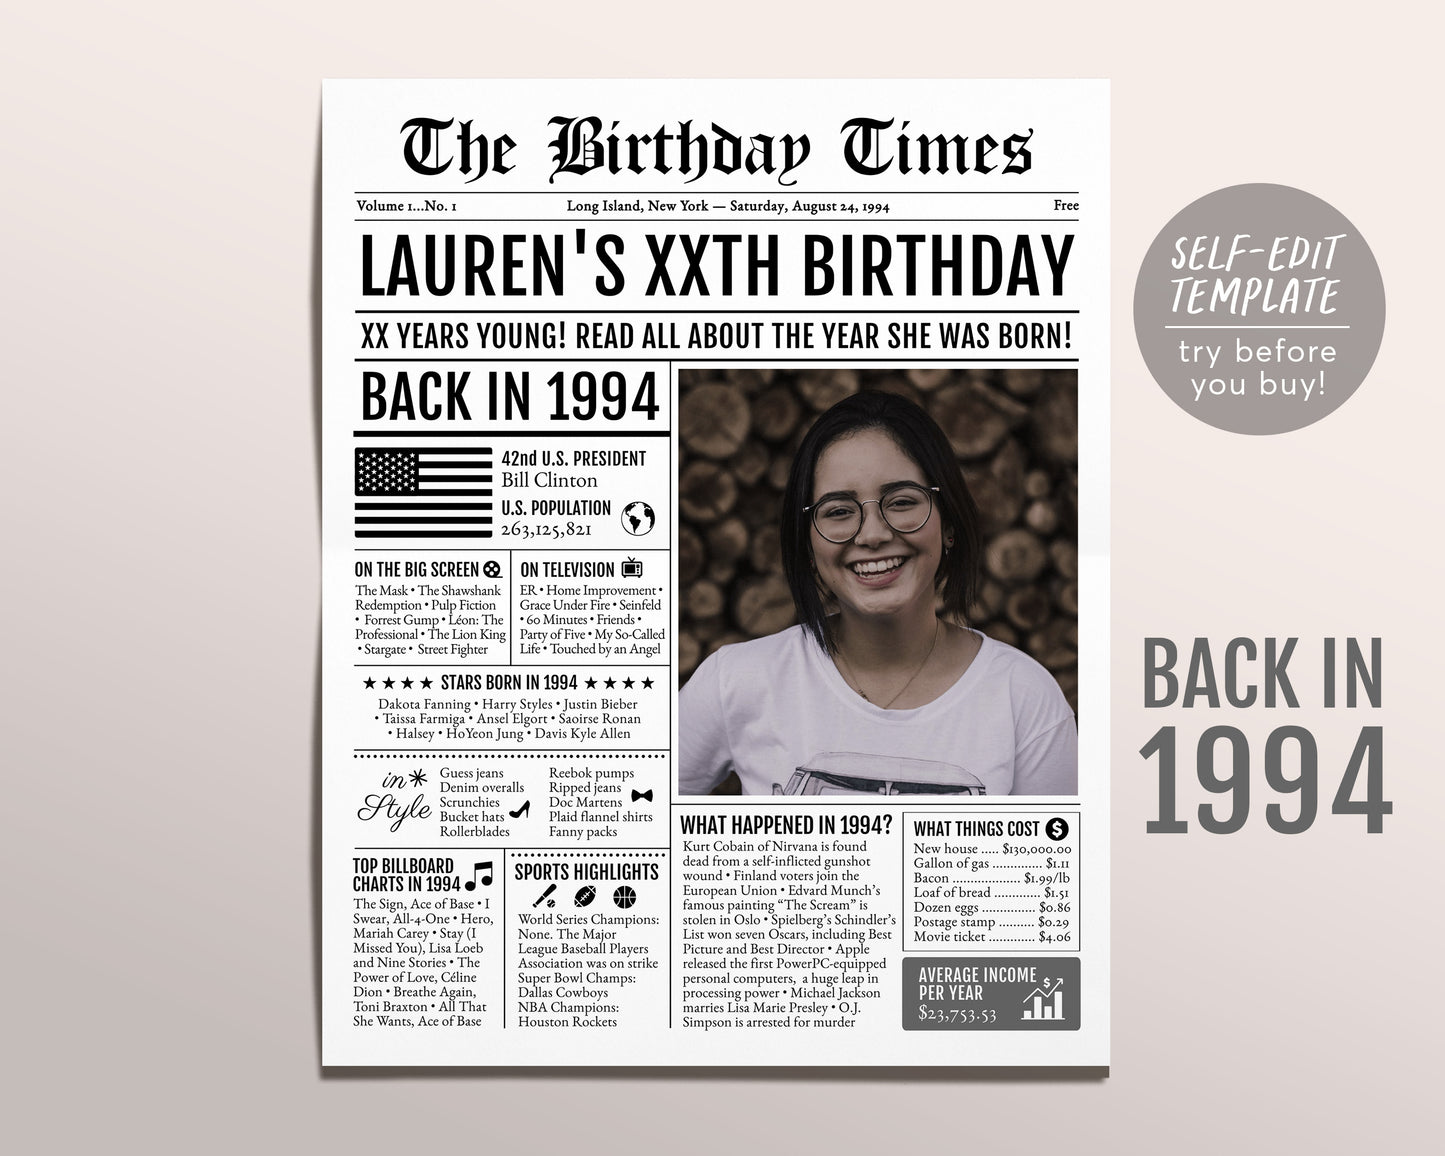 Back in 1994 Birthday Newspaper Editable Template, 29 30 31 Years Ago, 29th 30th 31st Birthday Sign Decorations Decor for Men or Women